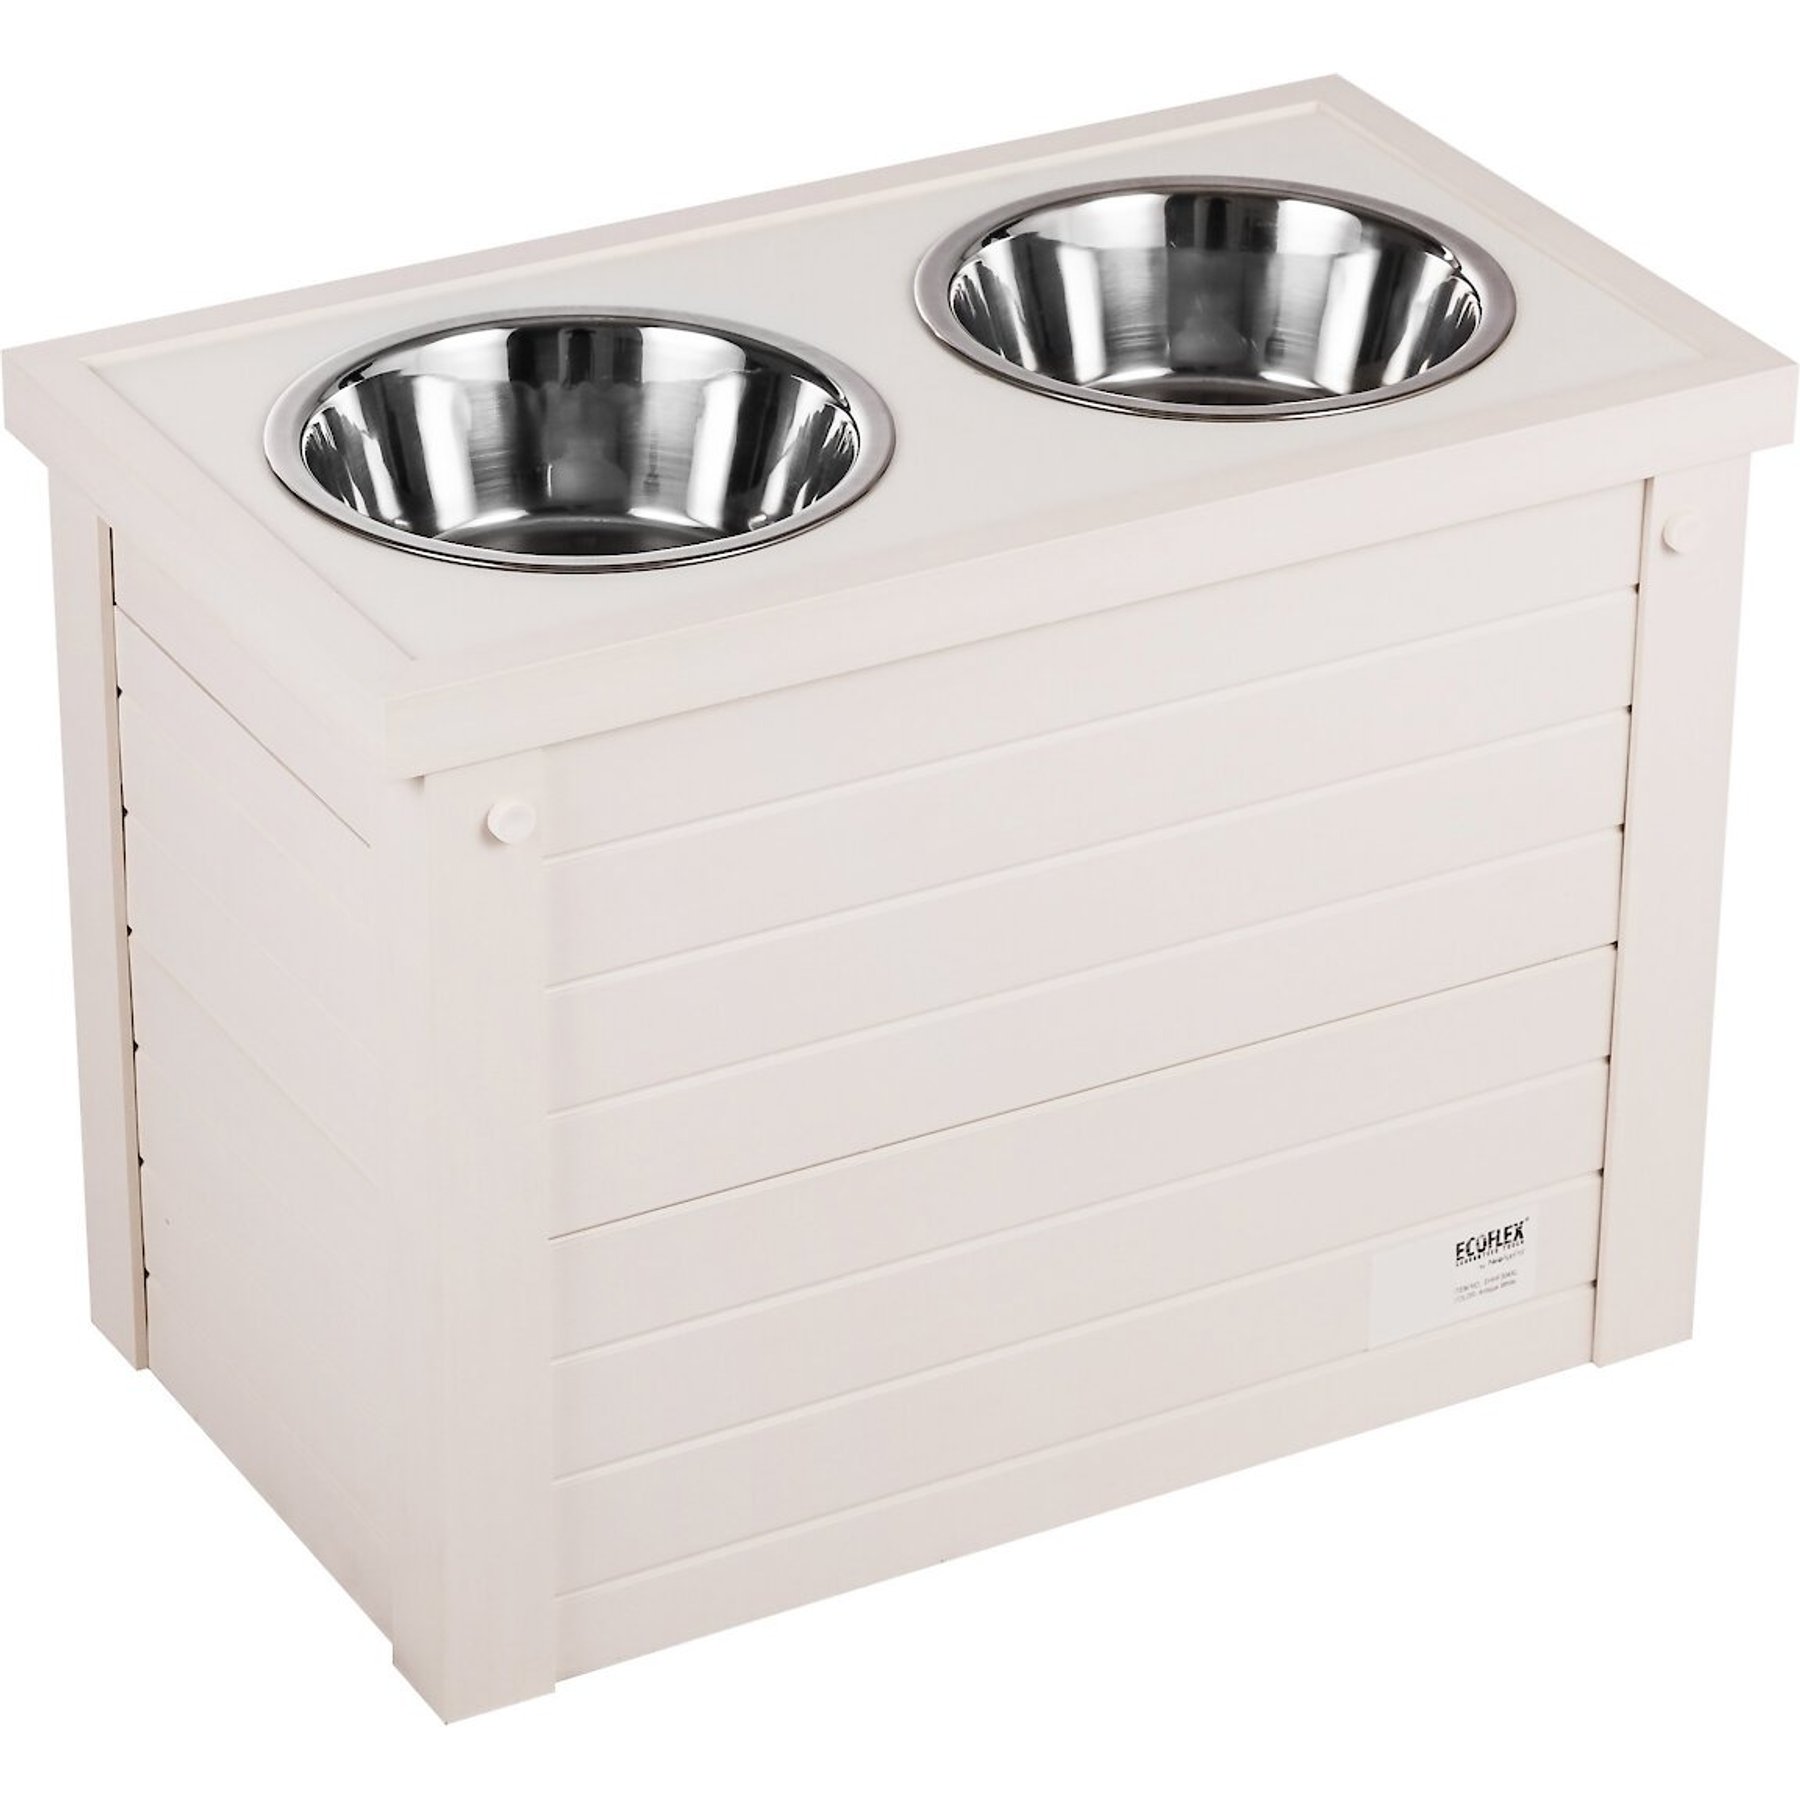 Simple Solid Bowl + Dog Bowl Stand – Waggo